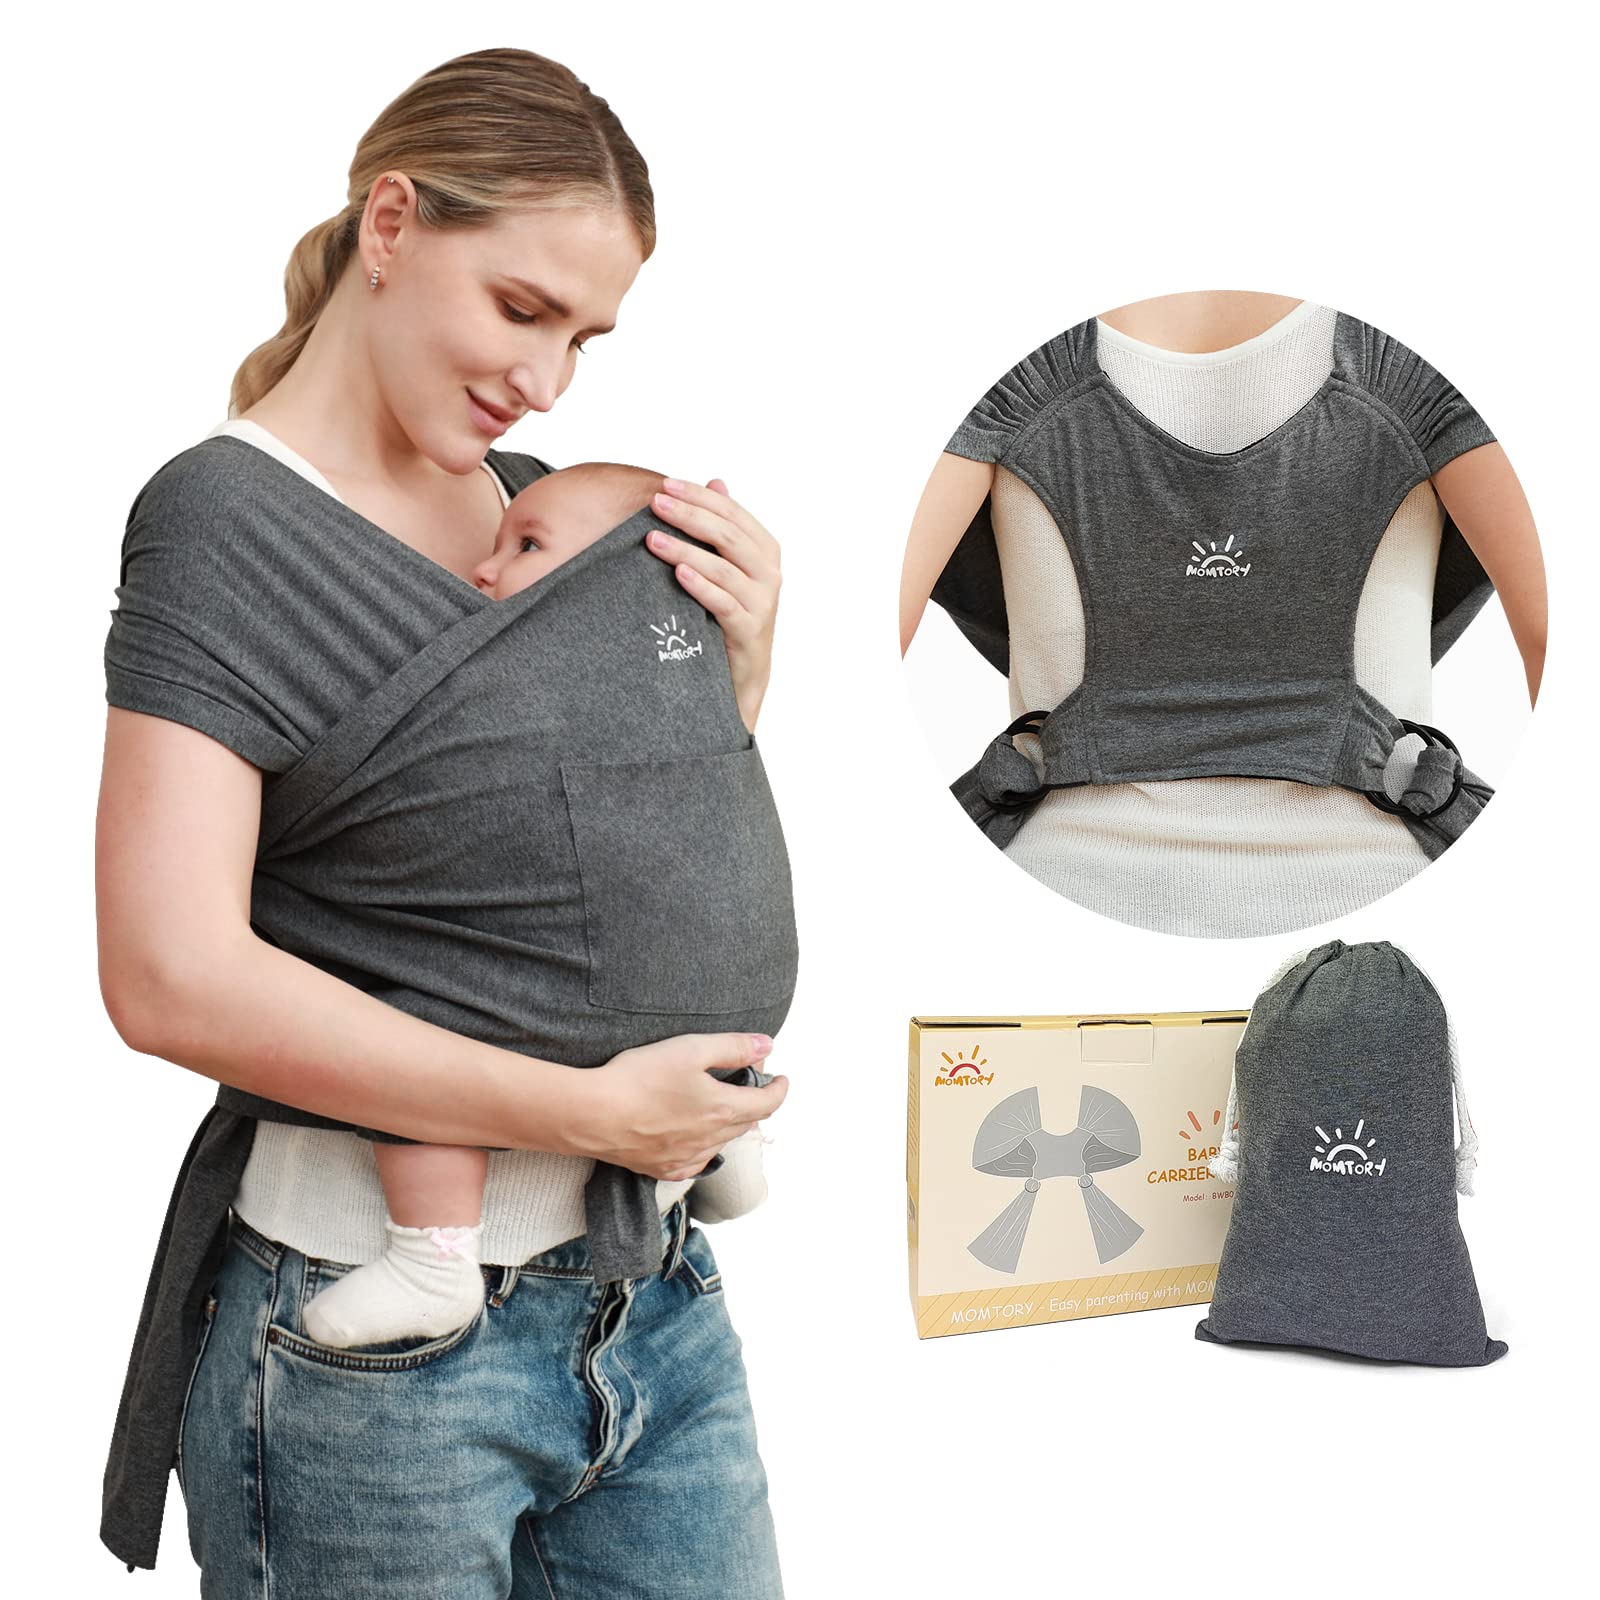 Baby Wraps Carrier, Baby Sling Newborn to Toddler, Breathable and Hands Free Baby Carrier Sling, Adjustable Baby Carriers (Grey)